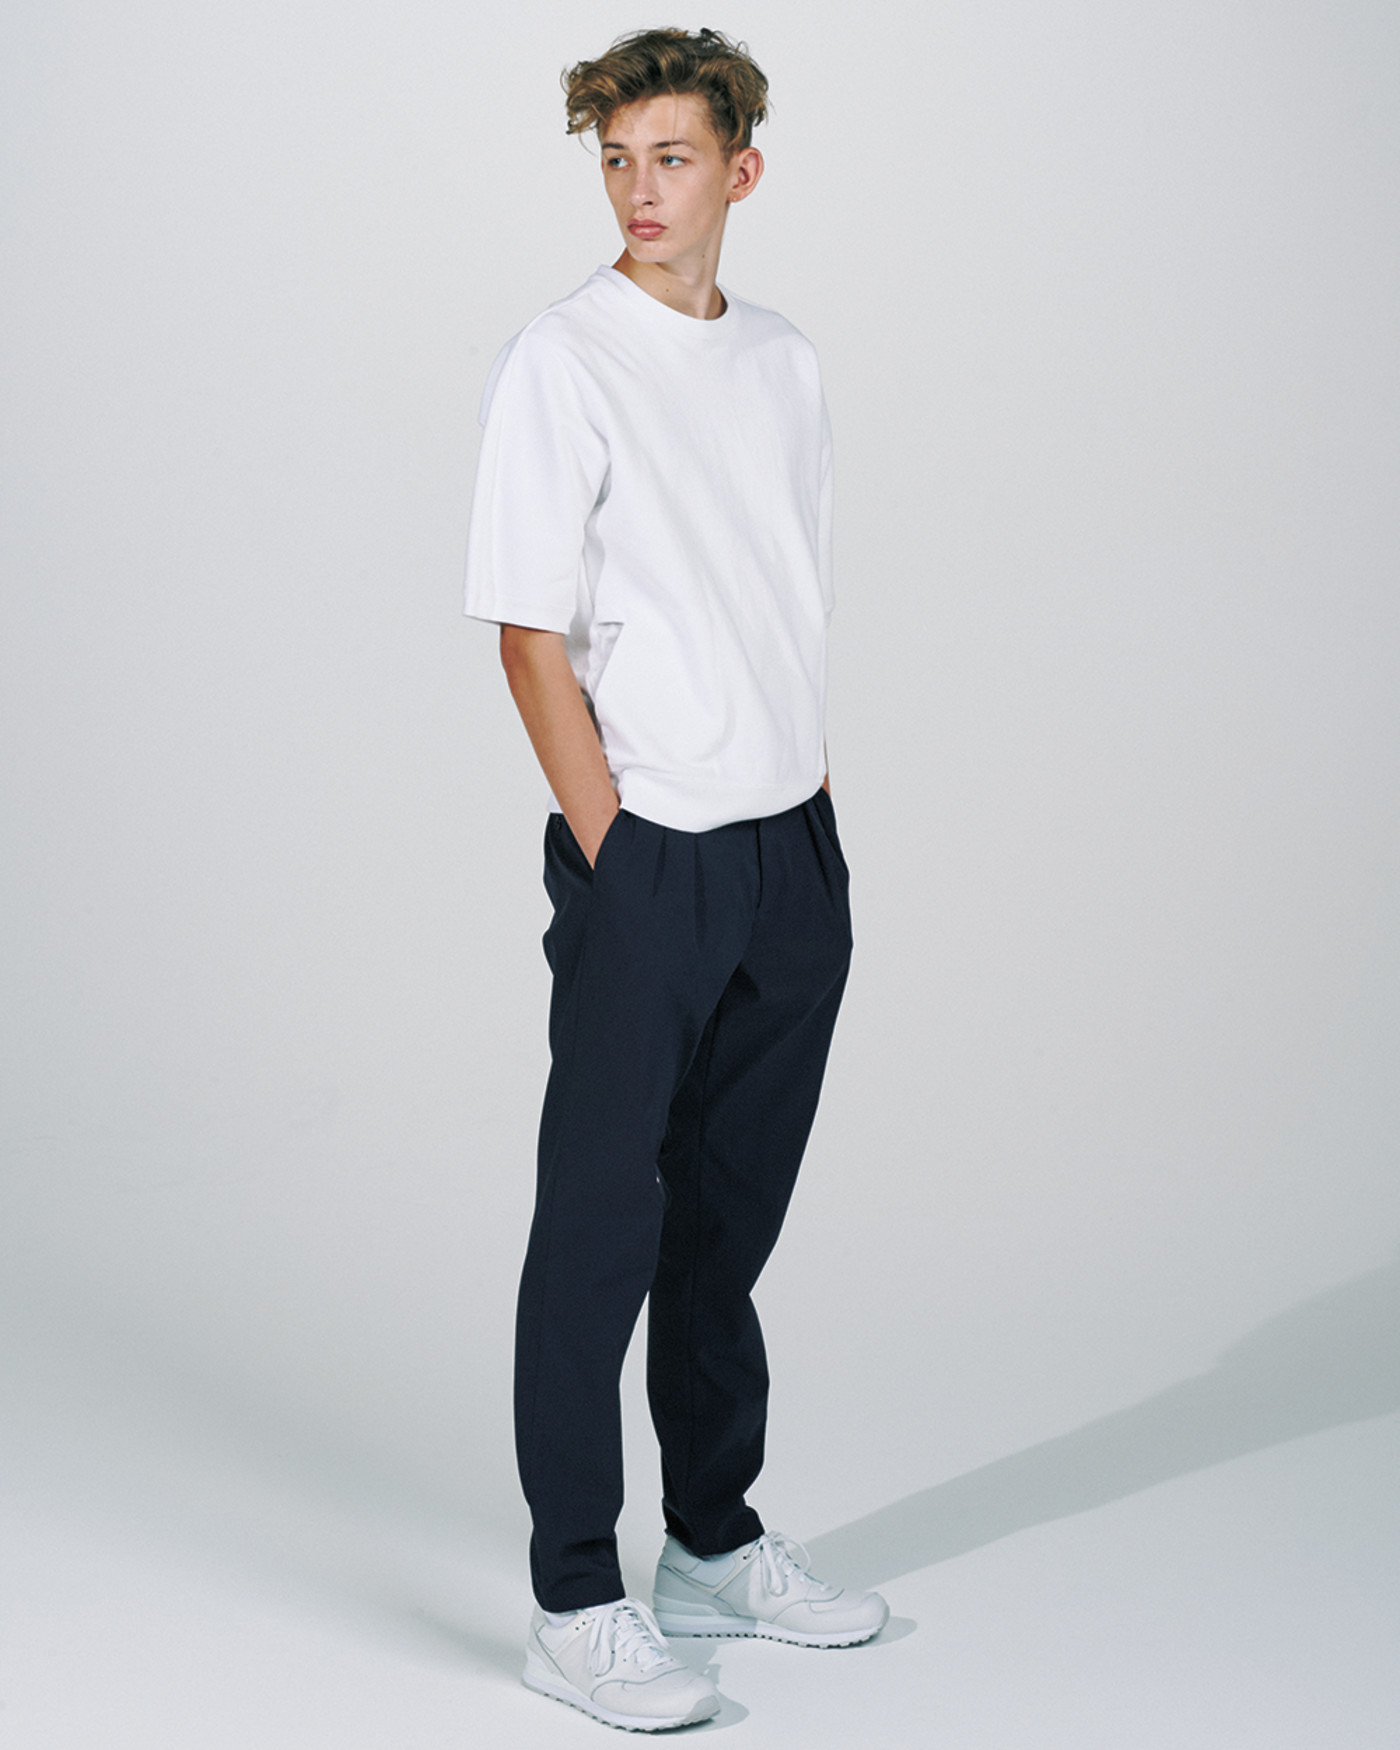 nanamica Go Back to Basics for their Latest Collection | Complex UK